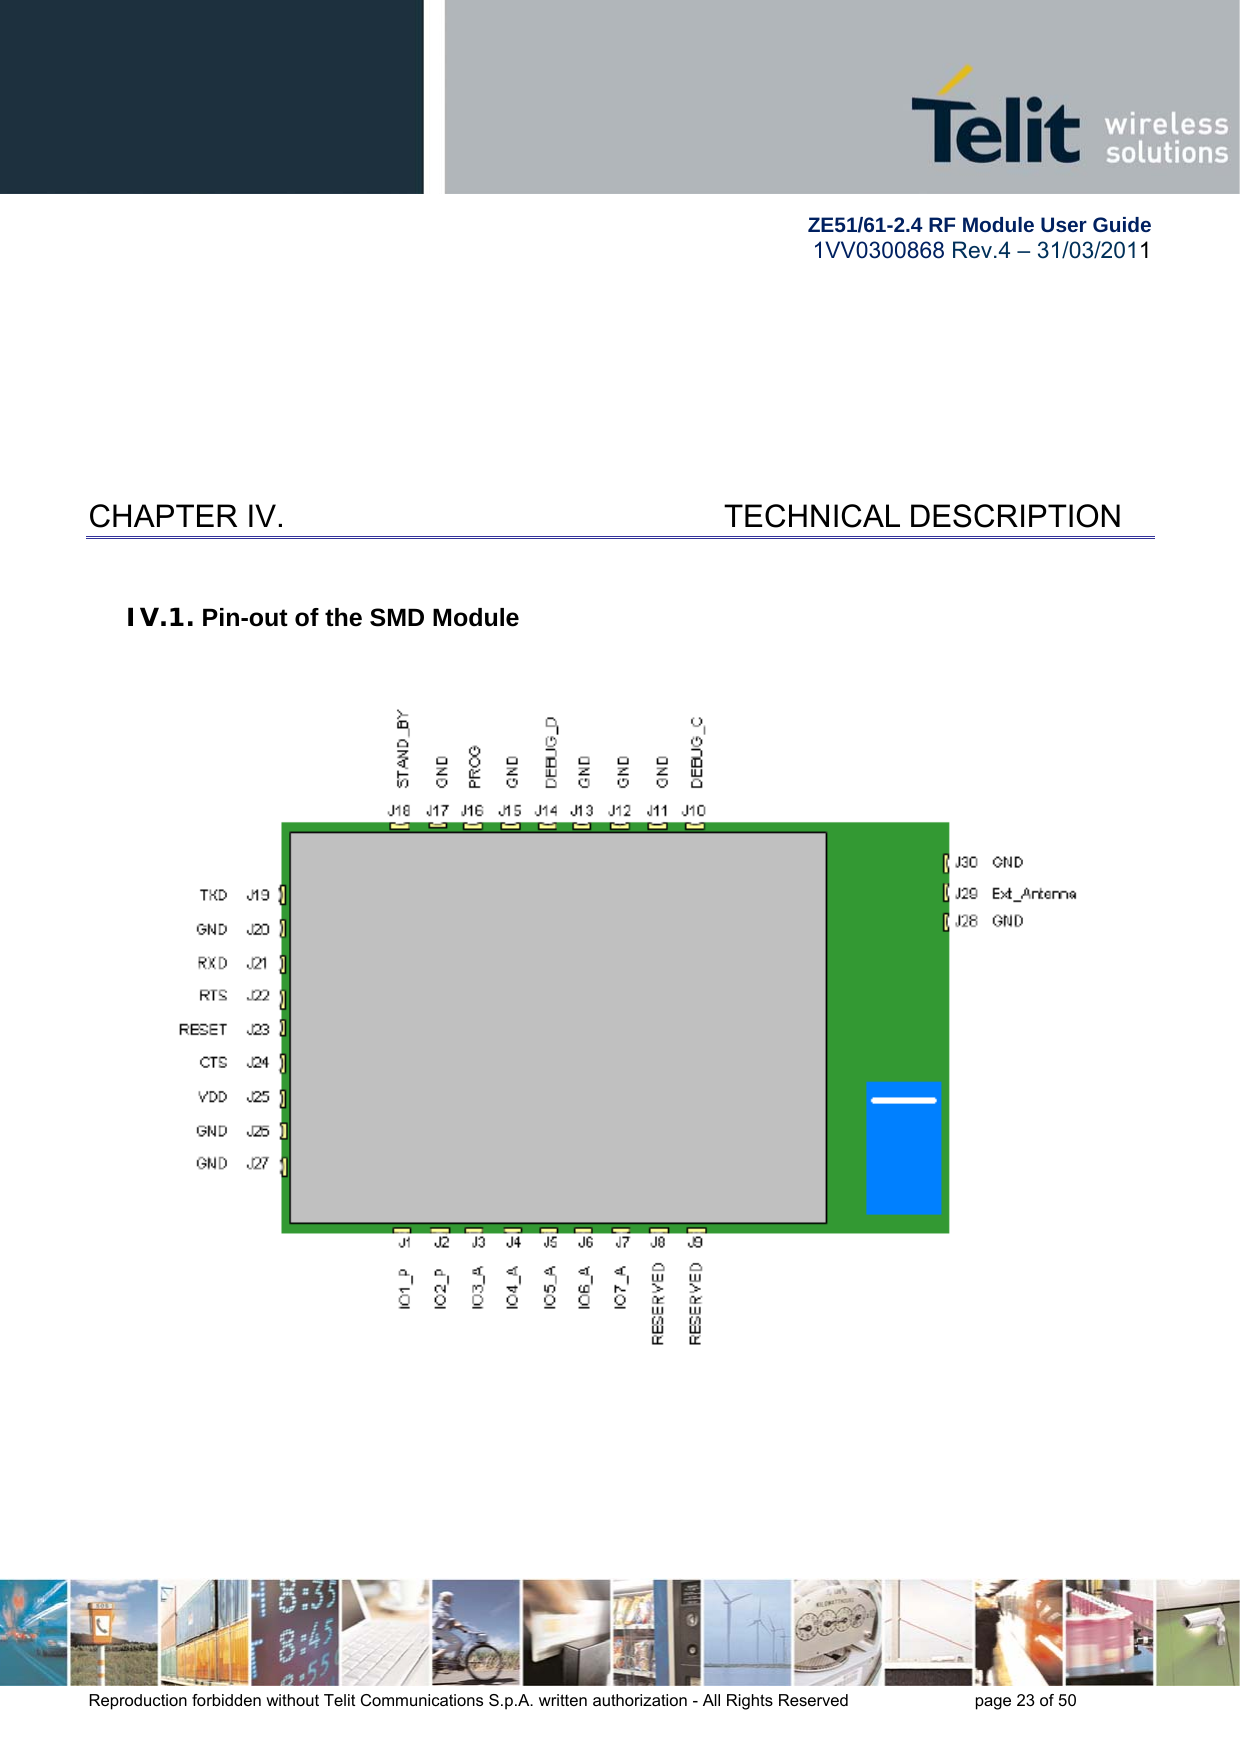        ZE51/61-2.4 RF Module User Guide 1VV0300868 Rev.4 – 31/03/2011 Reproduction forbidden without Telit Communications S.p.A. written authorization - All Rights Reserved    page 23 of 50  CHAPTER IV.   TECHNICAL DESCRIPTION IV.1. Pin-out of the SMD Module     